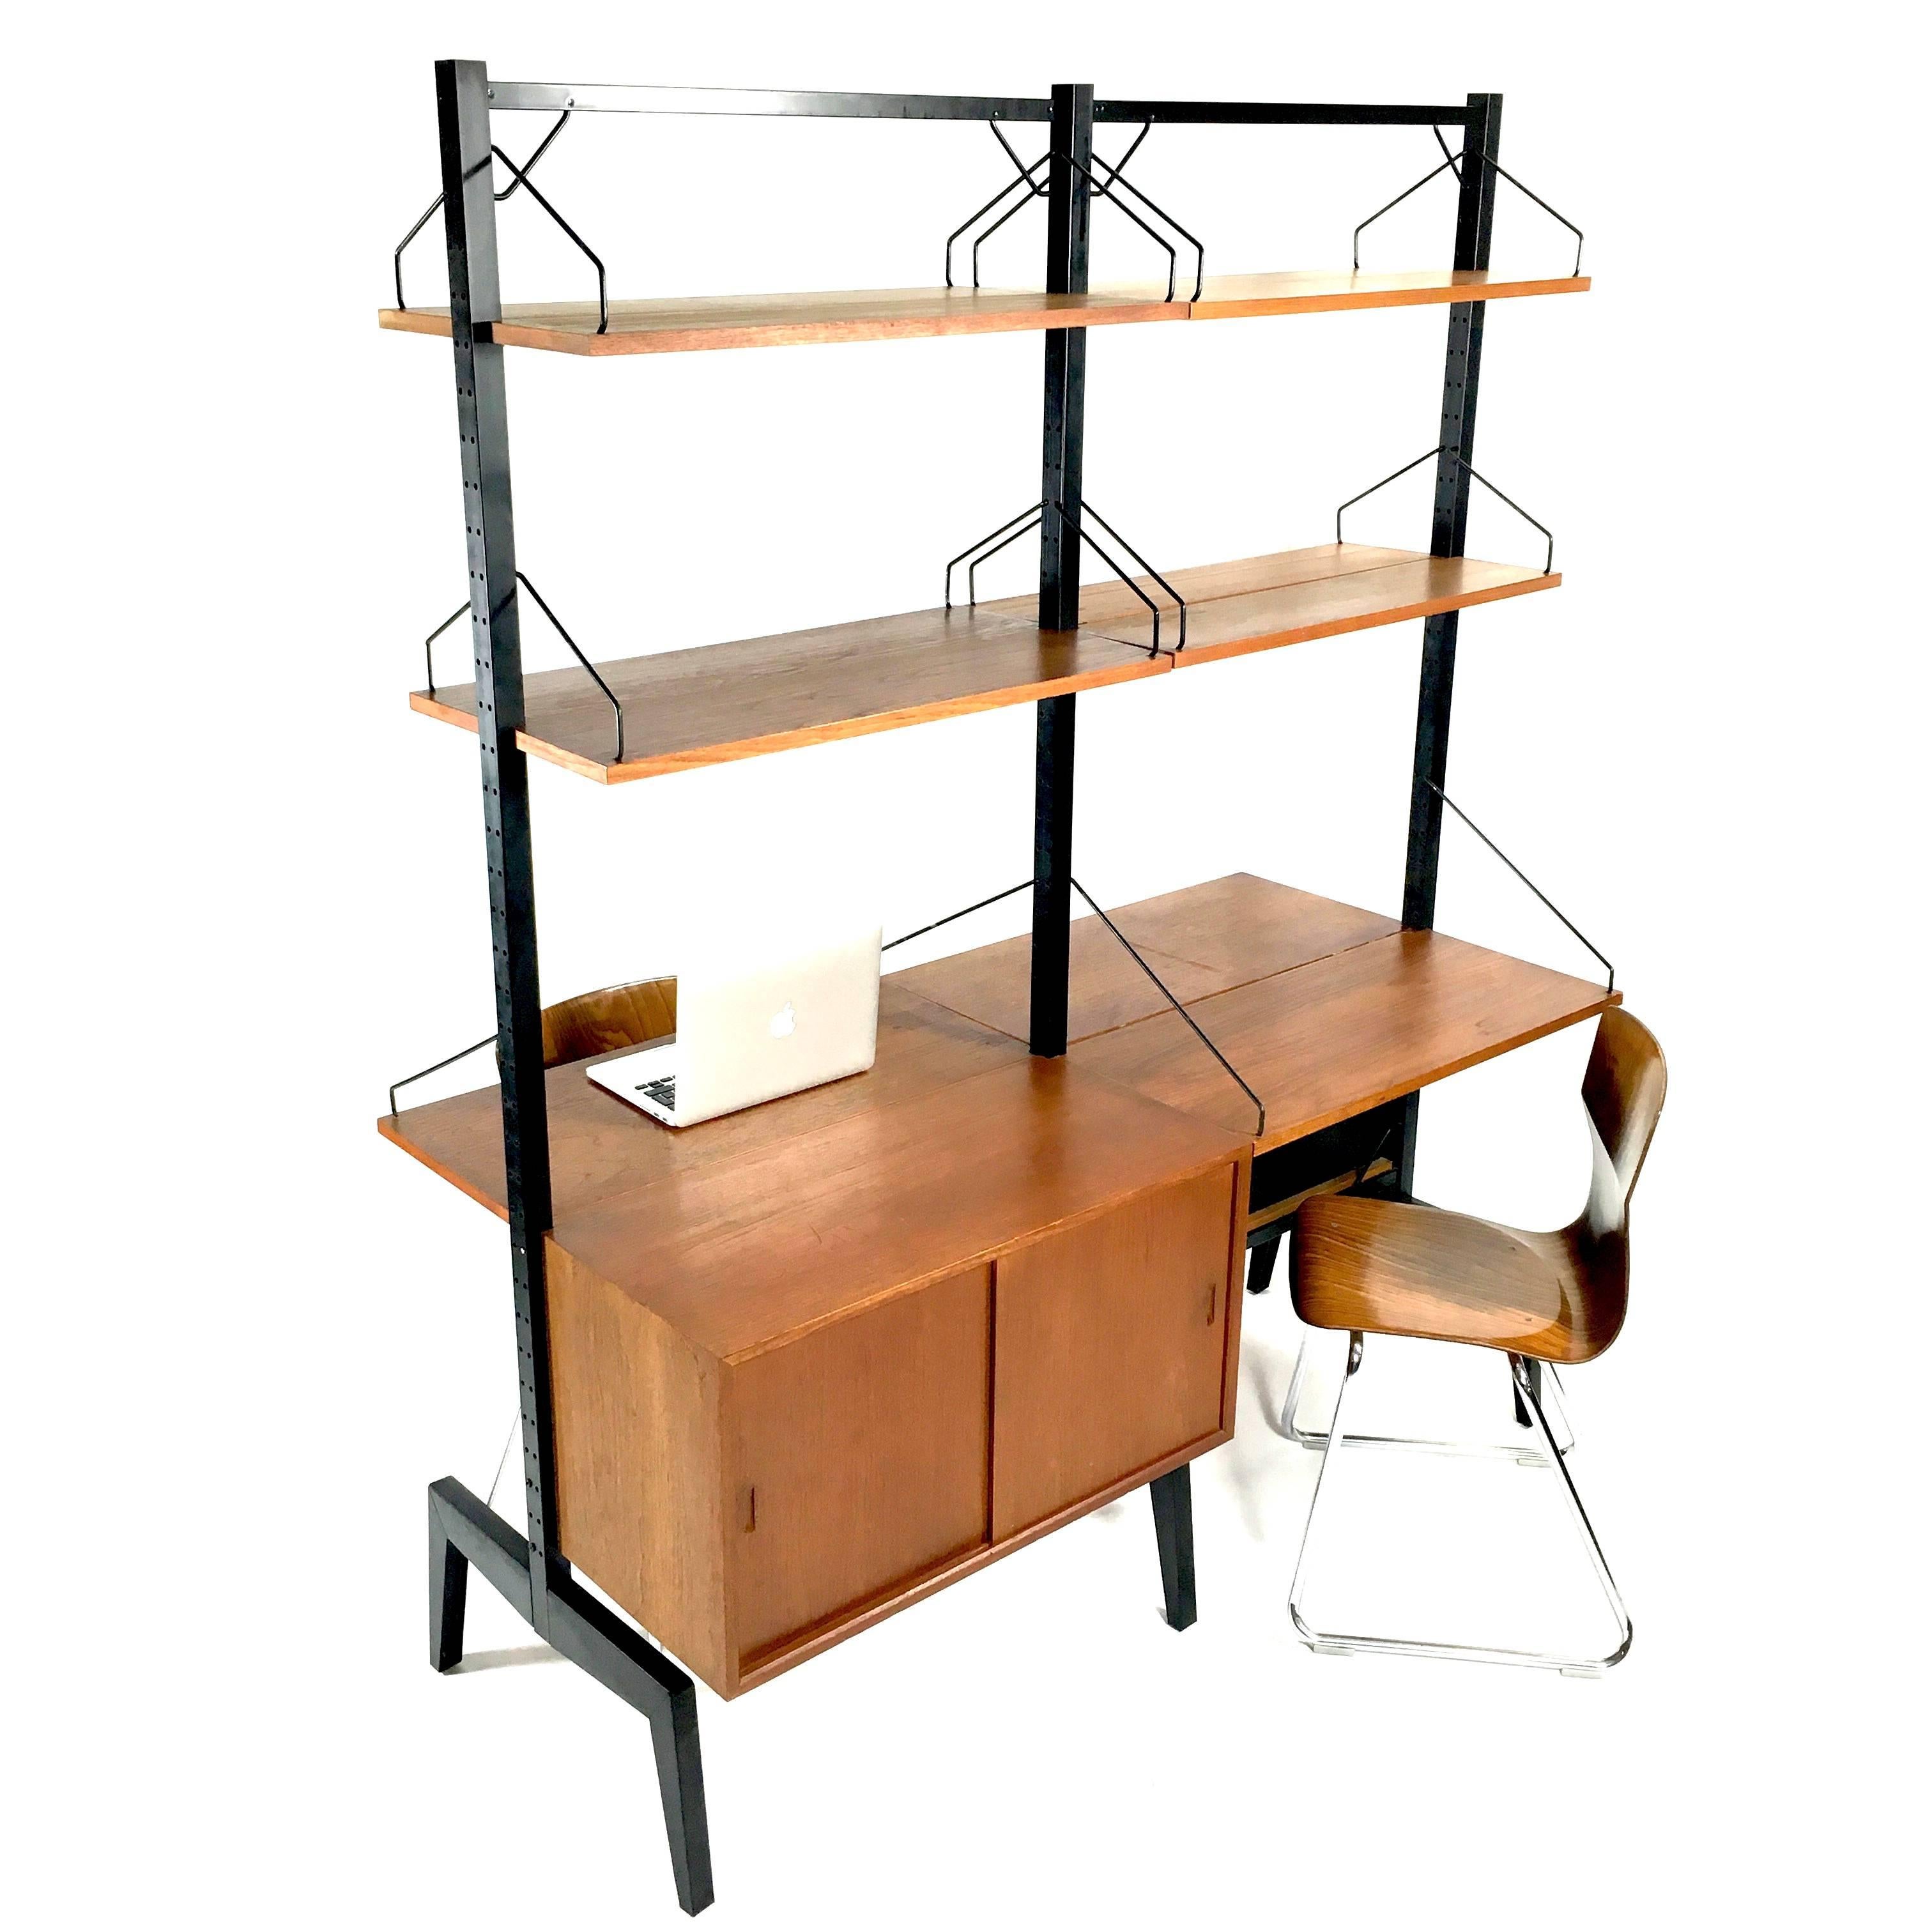 Mid-20th Century Poul Cadovius 'Royal' Work Space Unit or Room Divider, Denmark, 1950-1960s